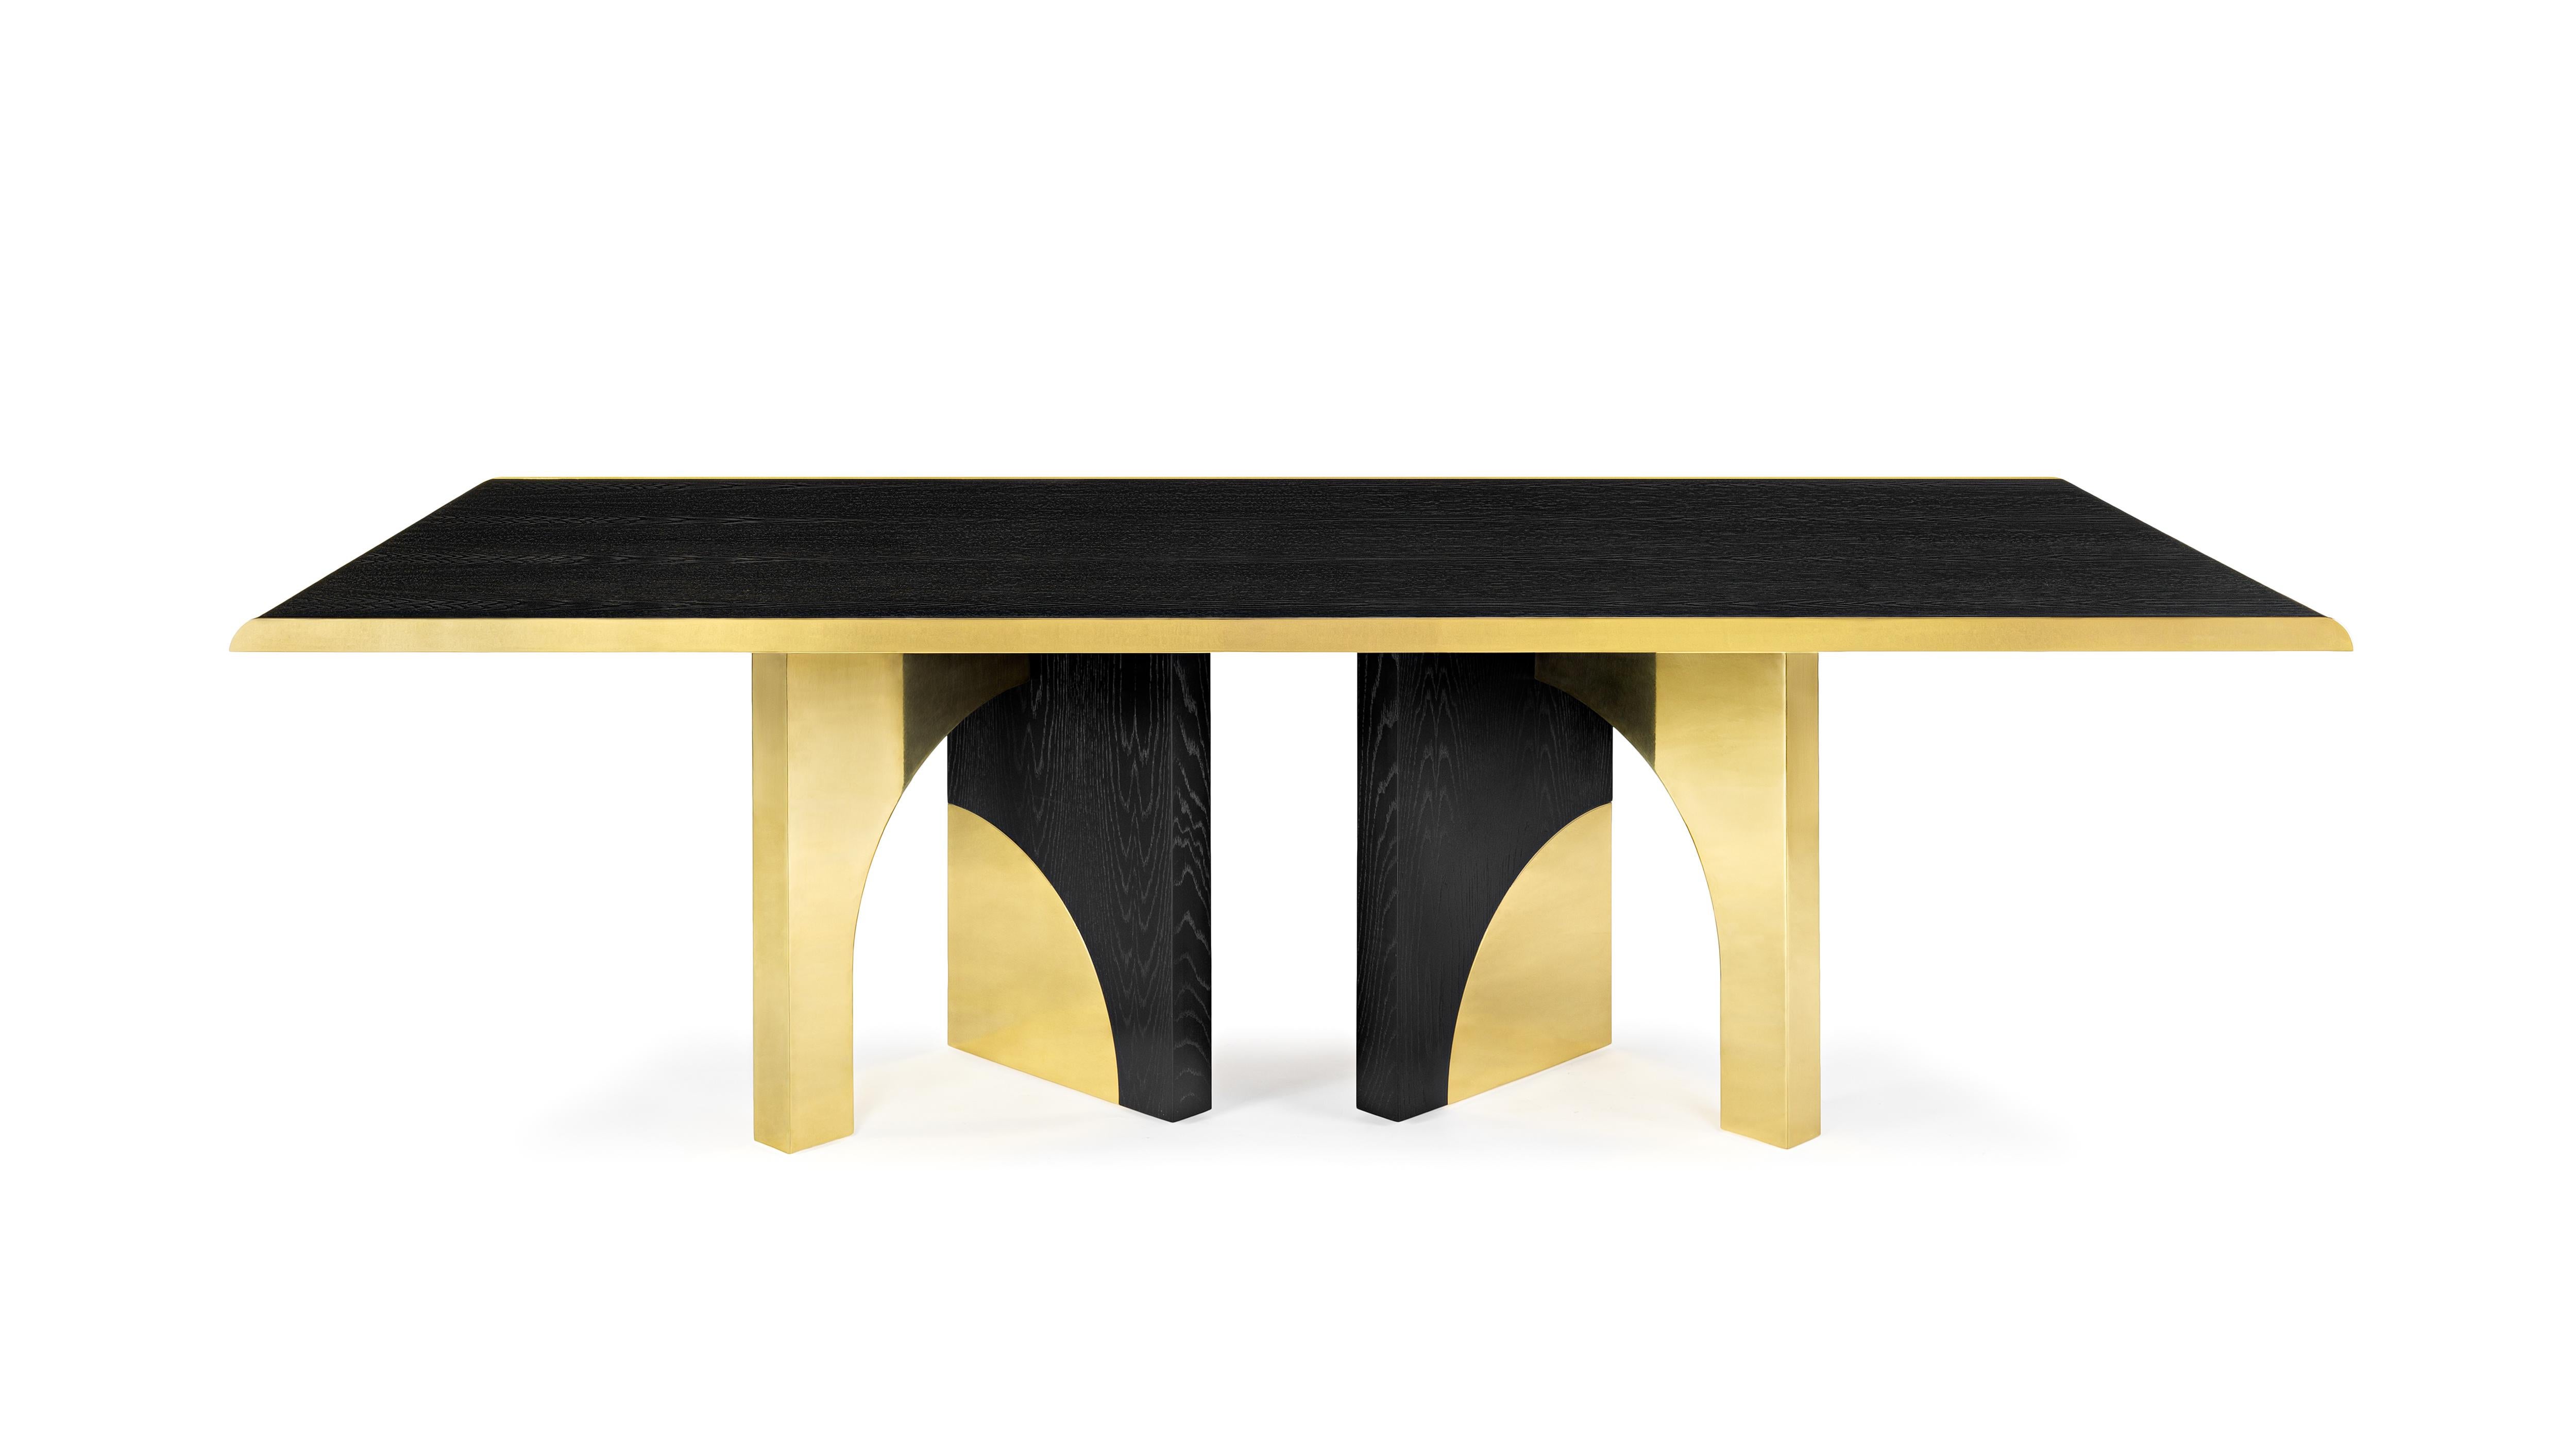 Utopia Dining Table by InsidherLand
Dimensions: D 115 x W 240 x H 74 cm.
Materials: Dark oak veneer with open grain and polished brass.
170 kg.
Also available in polished steel.

Since the Renaissance, many attempts have been made to develop ideal